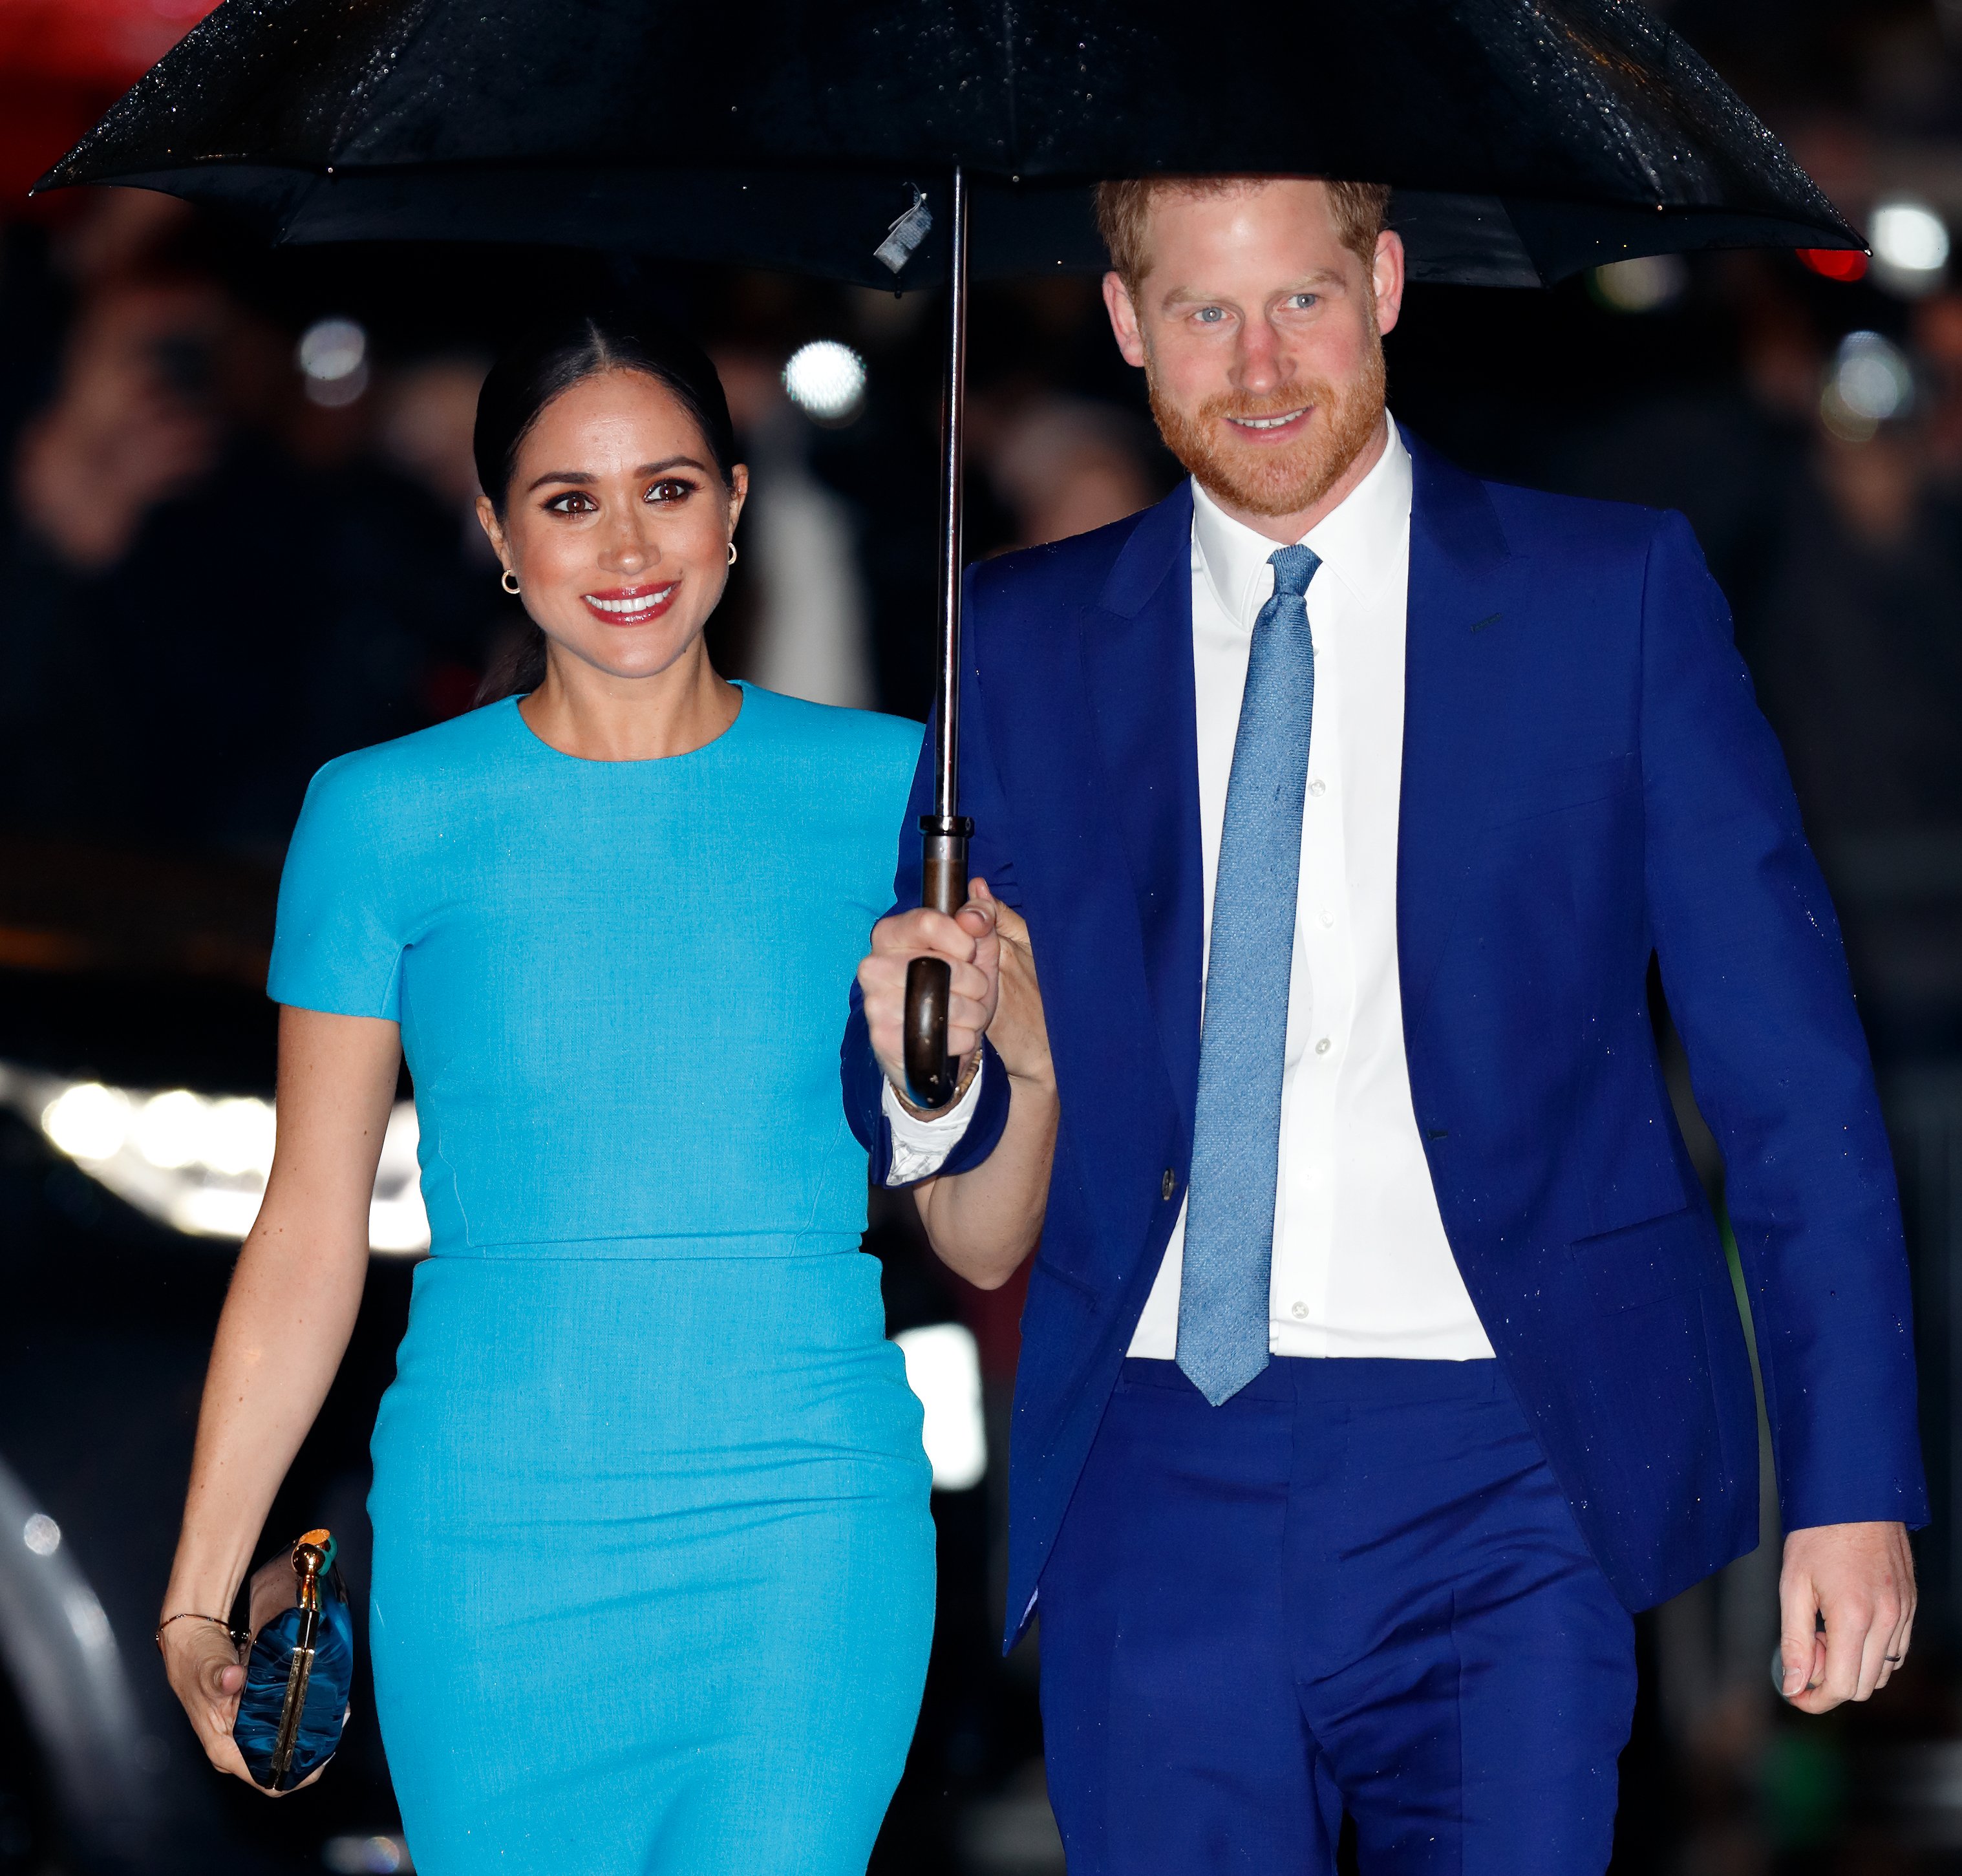 Prince Harry and Meghan attended the Endeavour Fund Awards at Mansion House in London on March 5, 2020. | Source: Getty Images